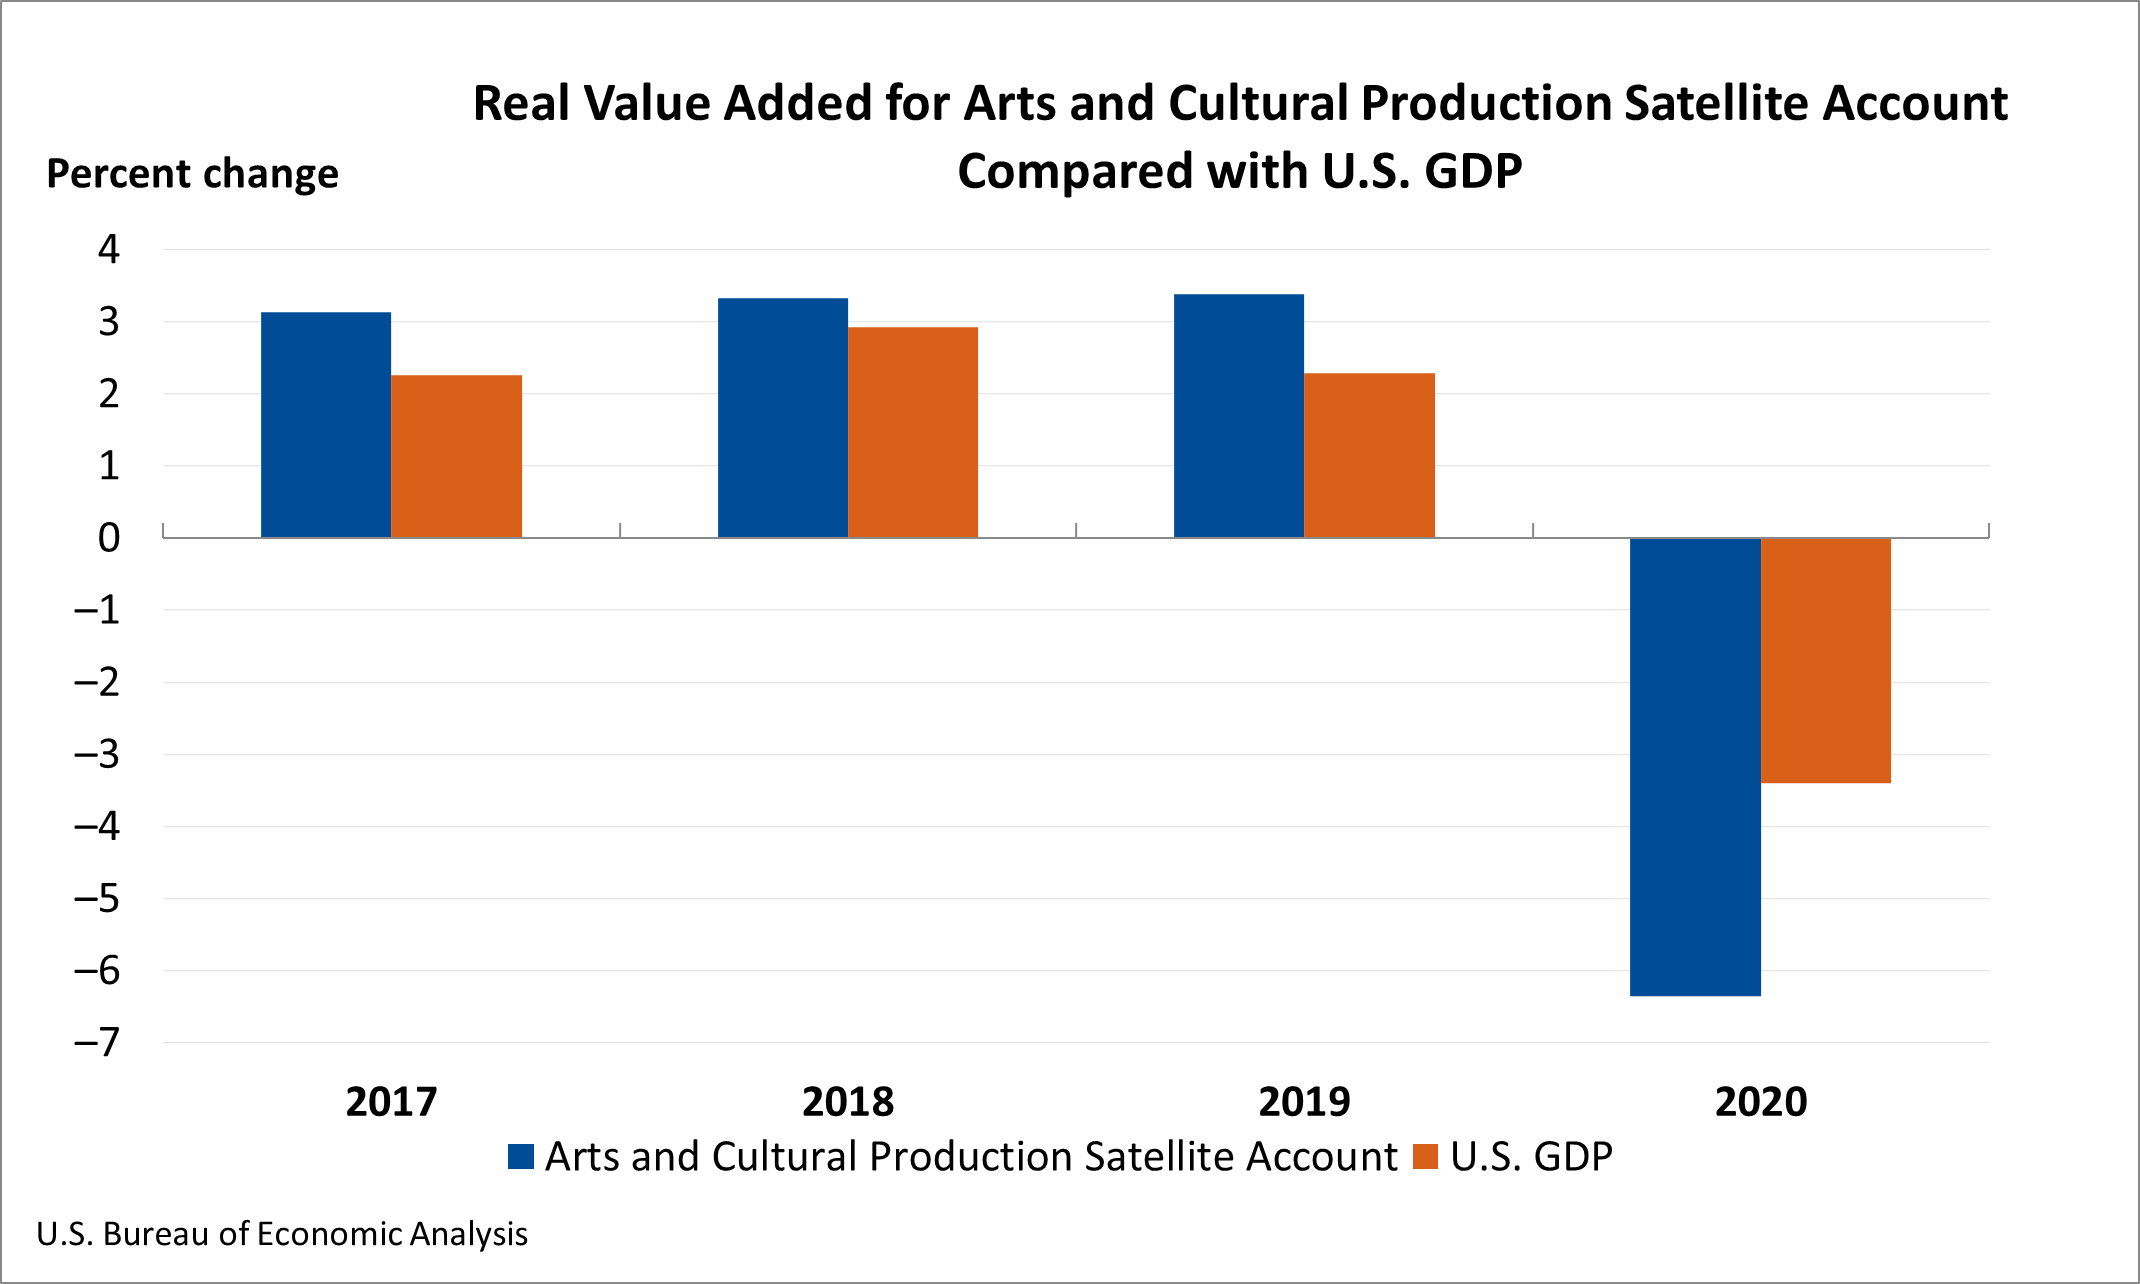 Real Value Added for ACPSA Compared with US GDP